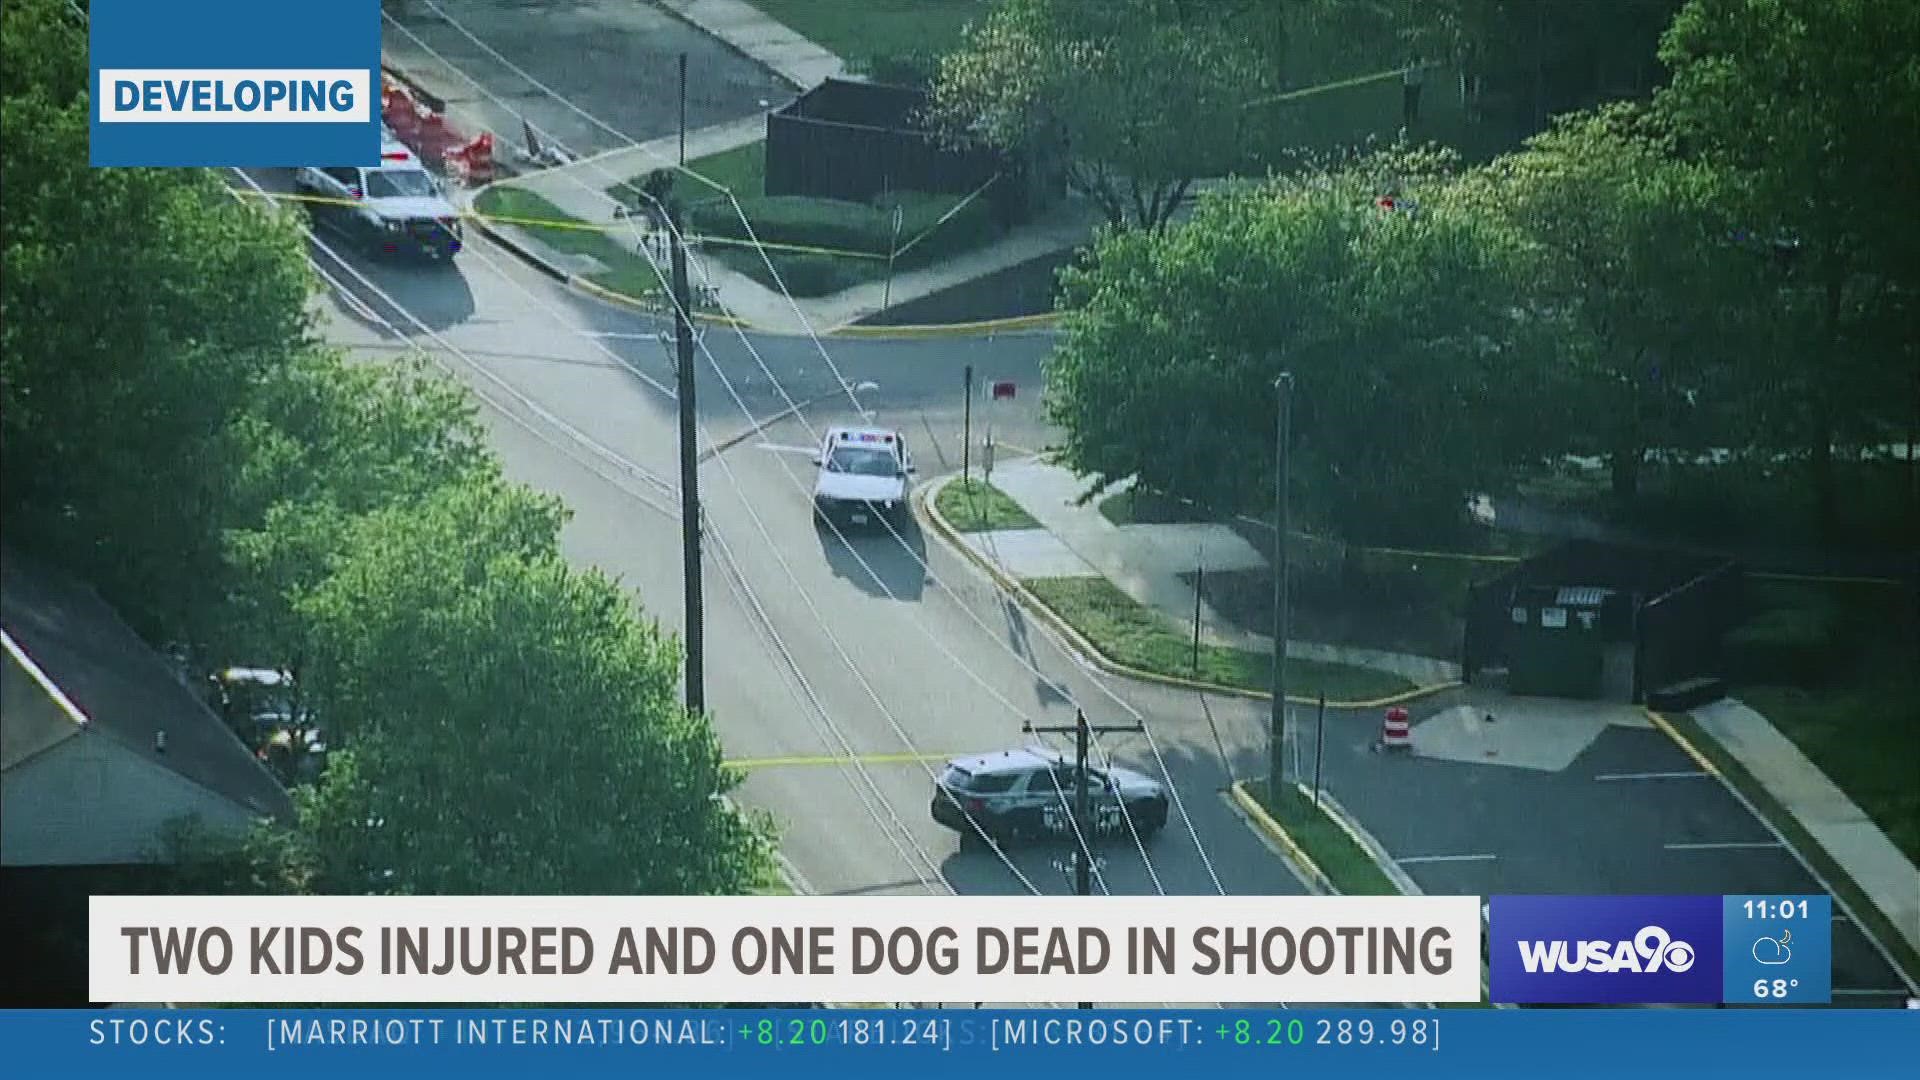 Police say a 14-year-old boy and 4-year-old boy have injuries that are not life-threatening. A 7-year-old terrier named Danger was killed.